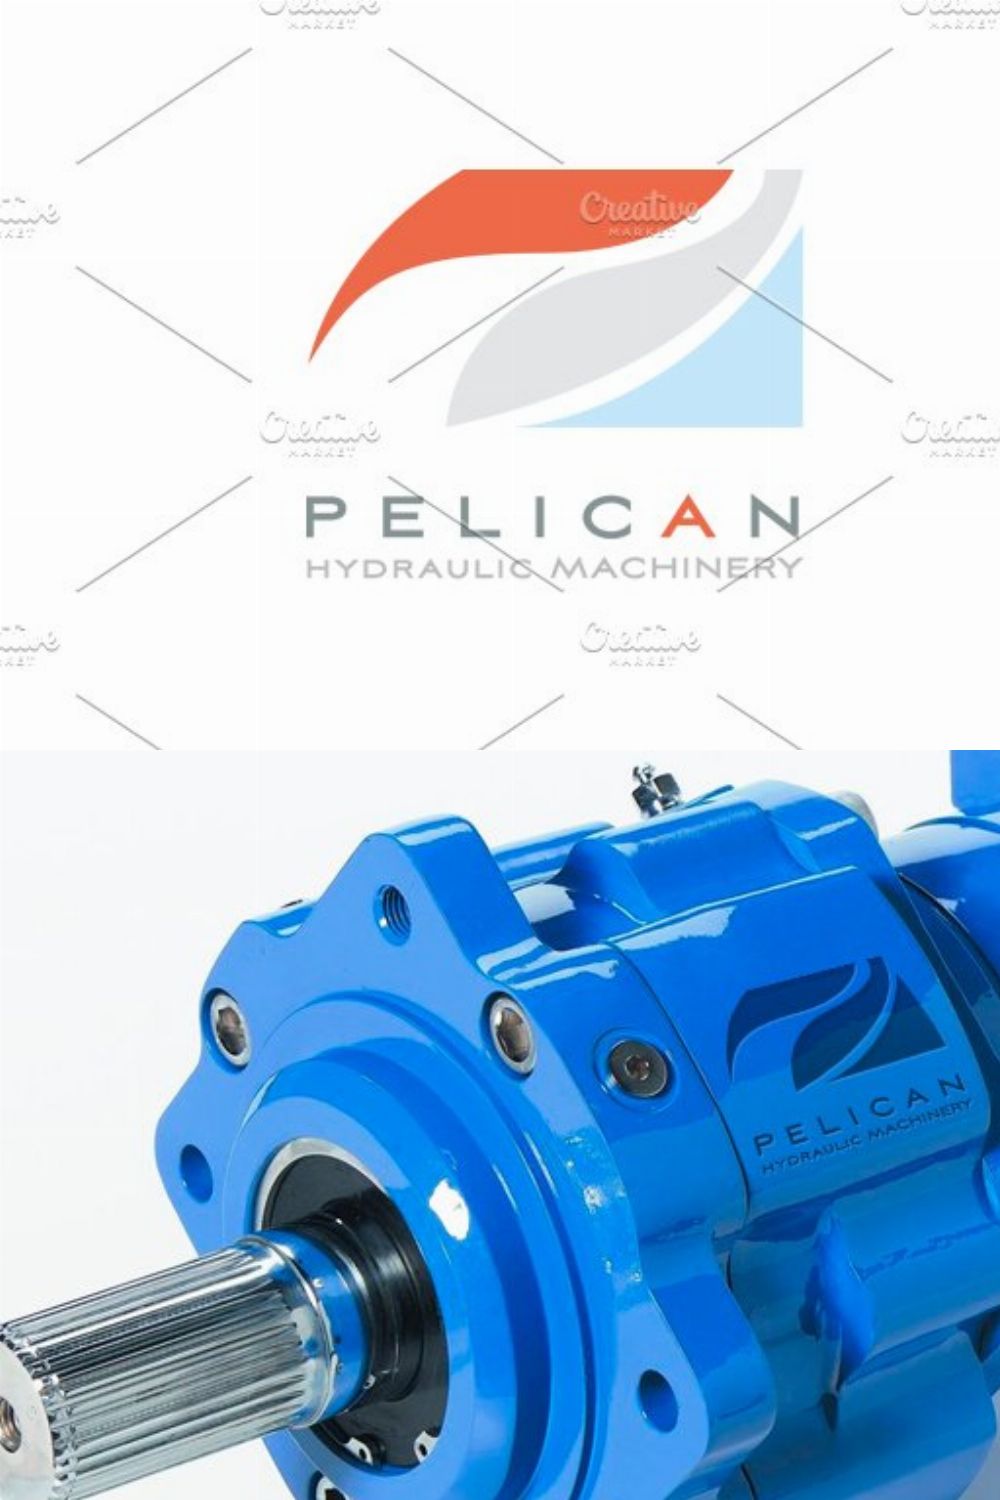 Pelican Hydraulic Machinery pinterest preview image.